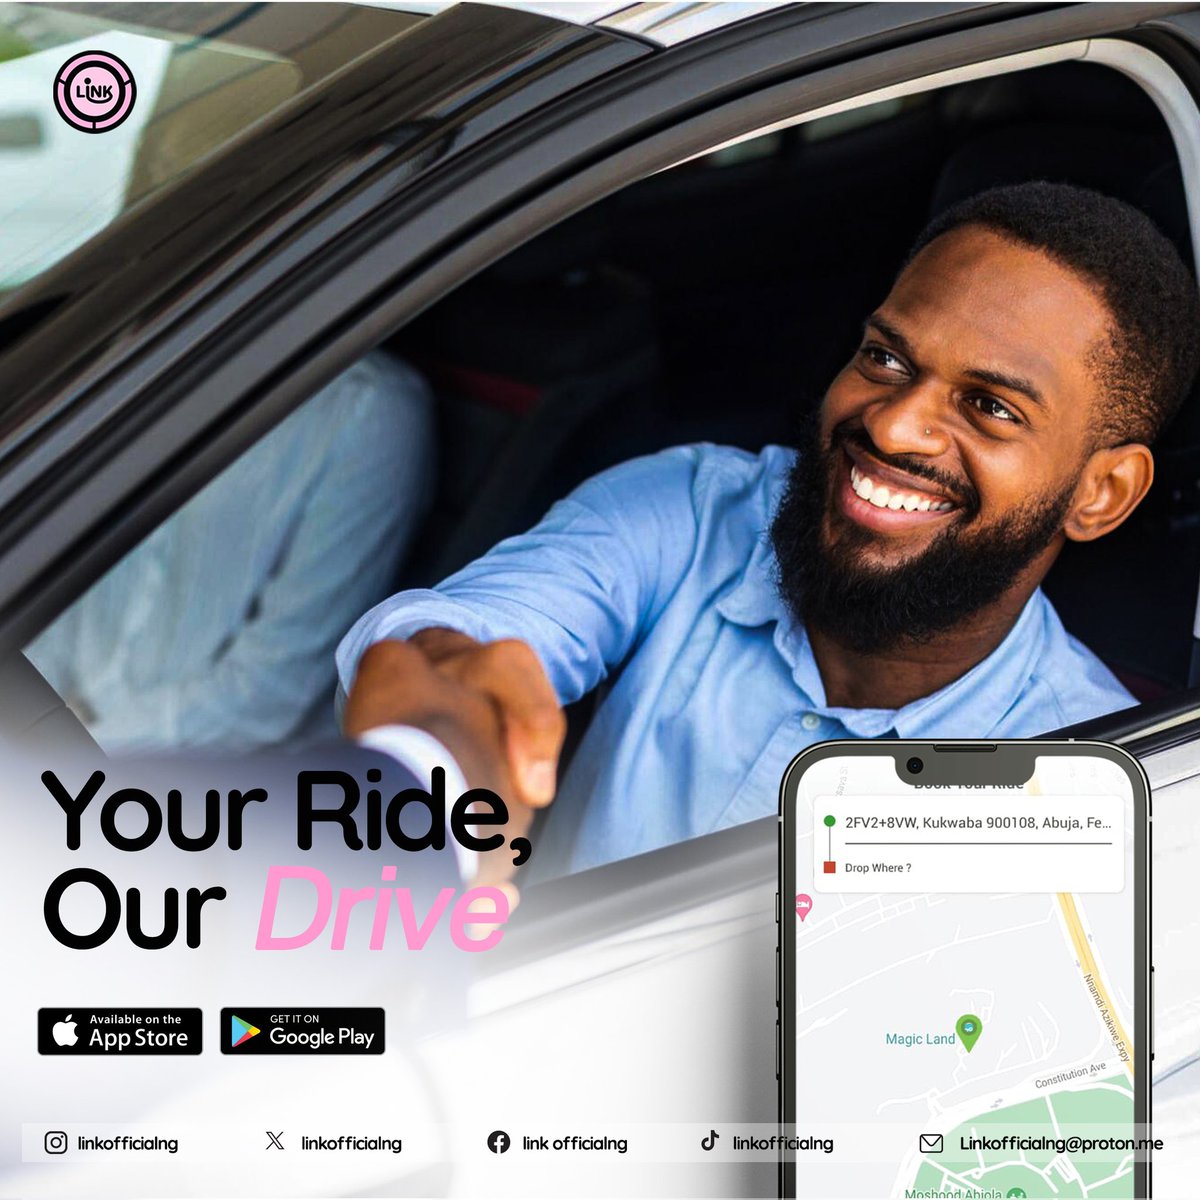 Experience the journey of a lifetime with LinkRide, your trusted rideshare service. With our user-friendly app, enhanced and reliable drivers, your destination is just a tap away. Join the community today, check out our the and see what's up, link is in the bio. #MondayMorning